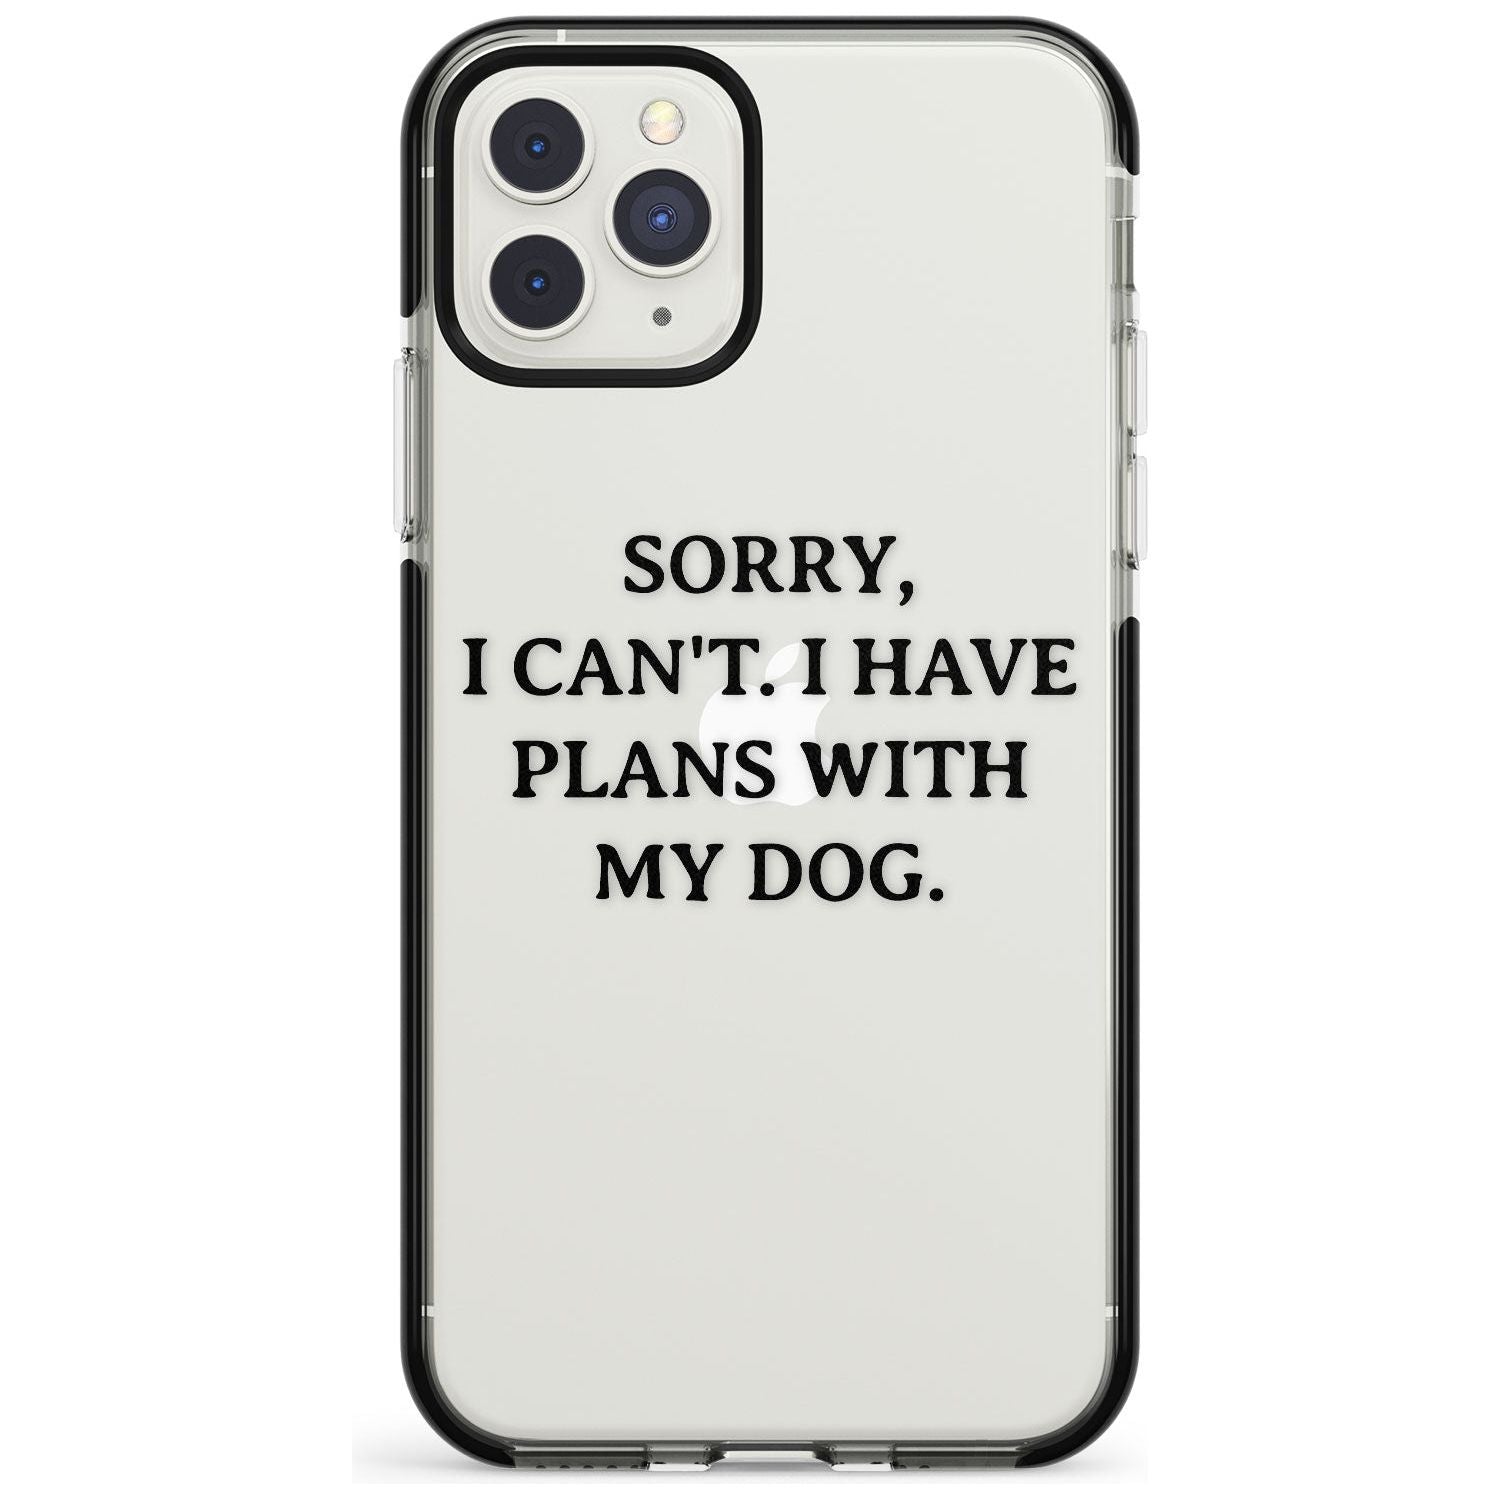 Plans with Dog Black Impact Phone Case for iPhone 11 Pro Max